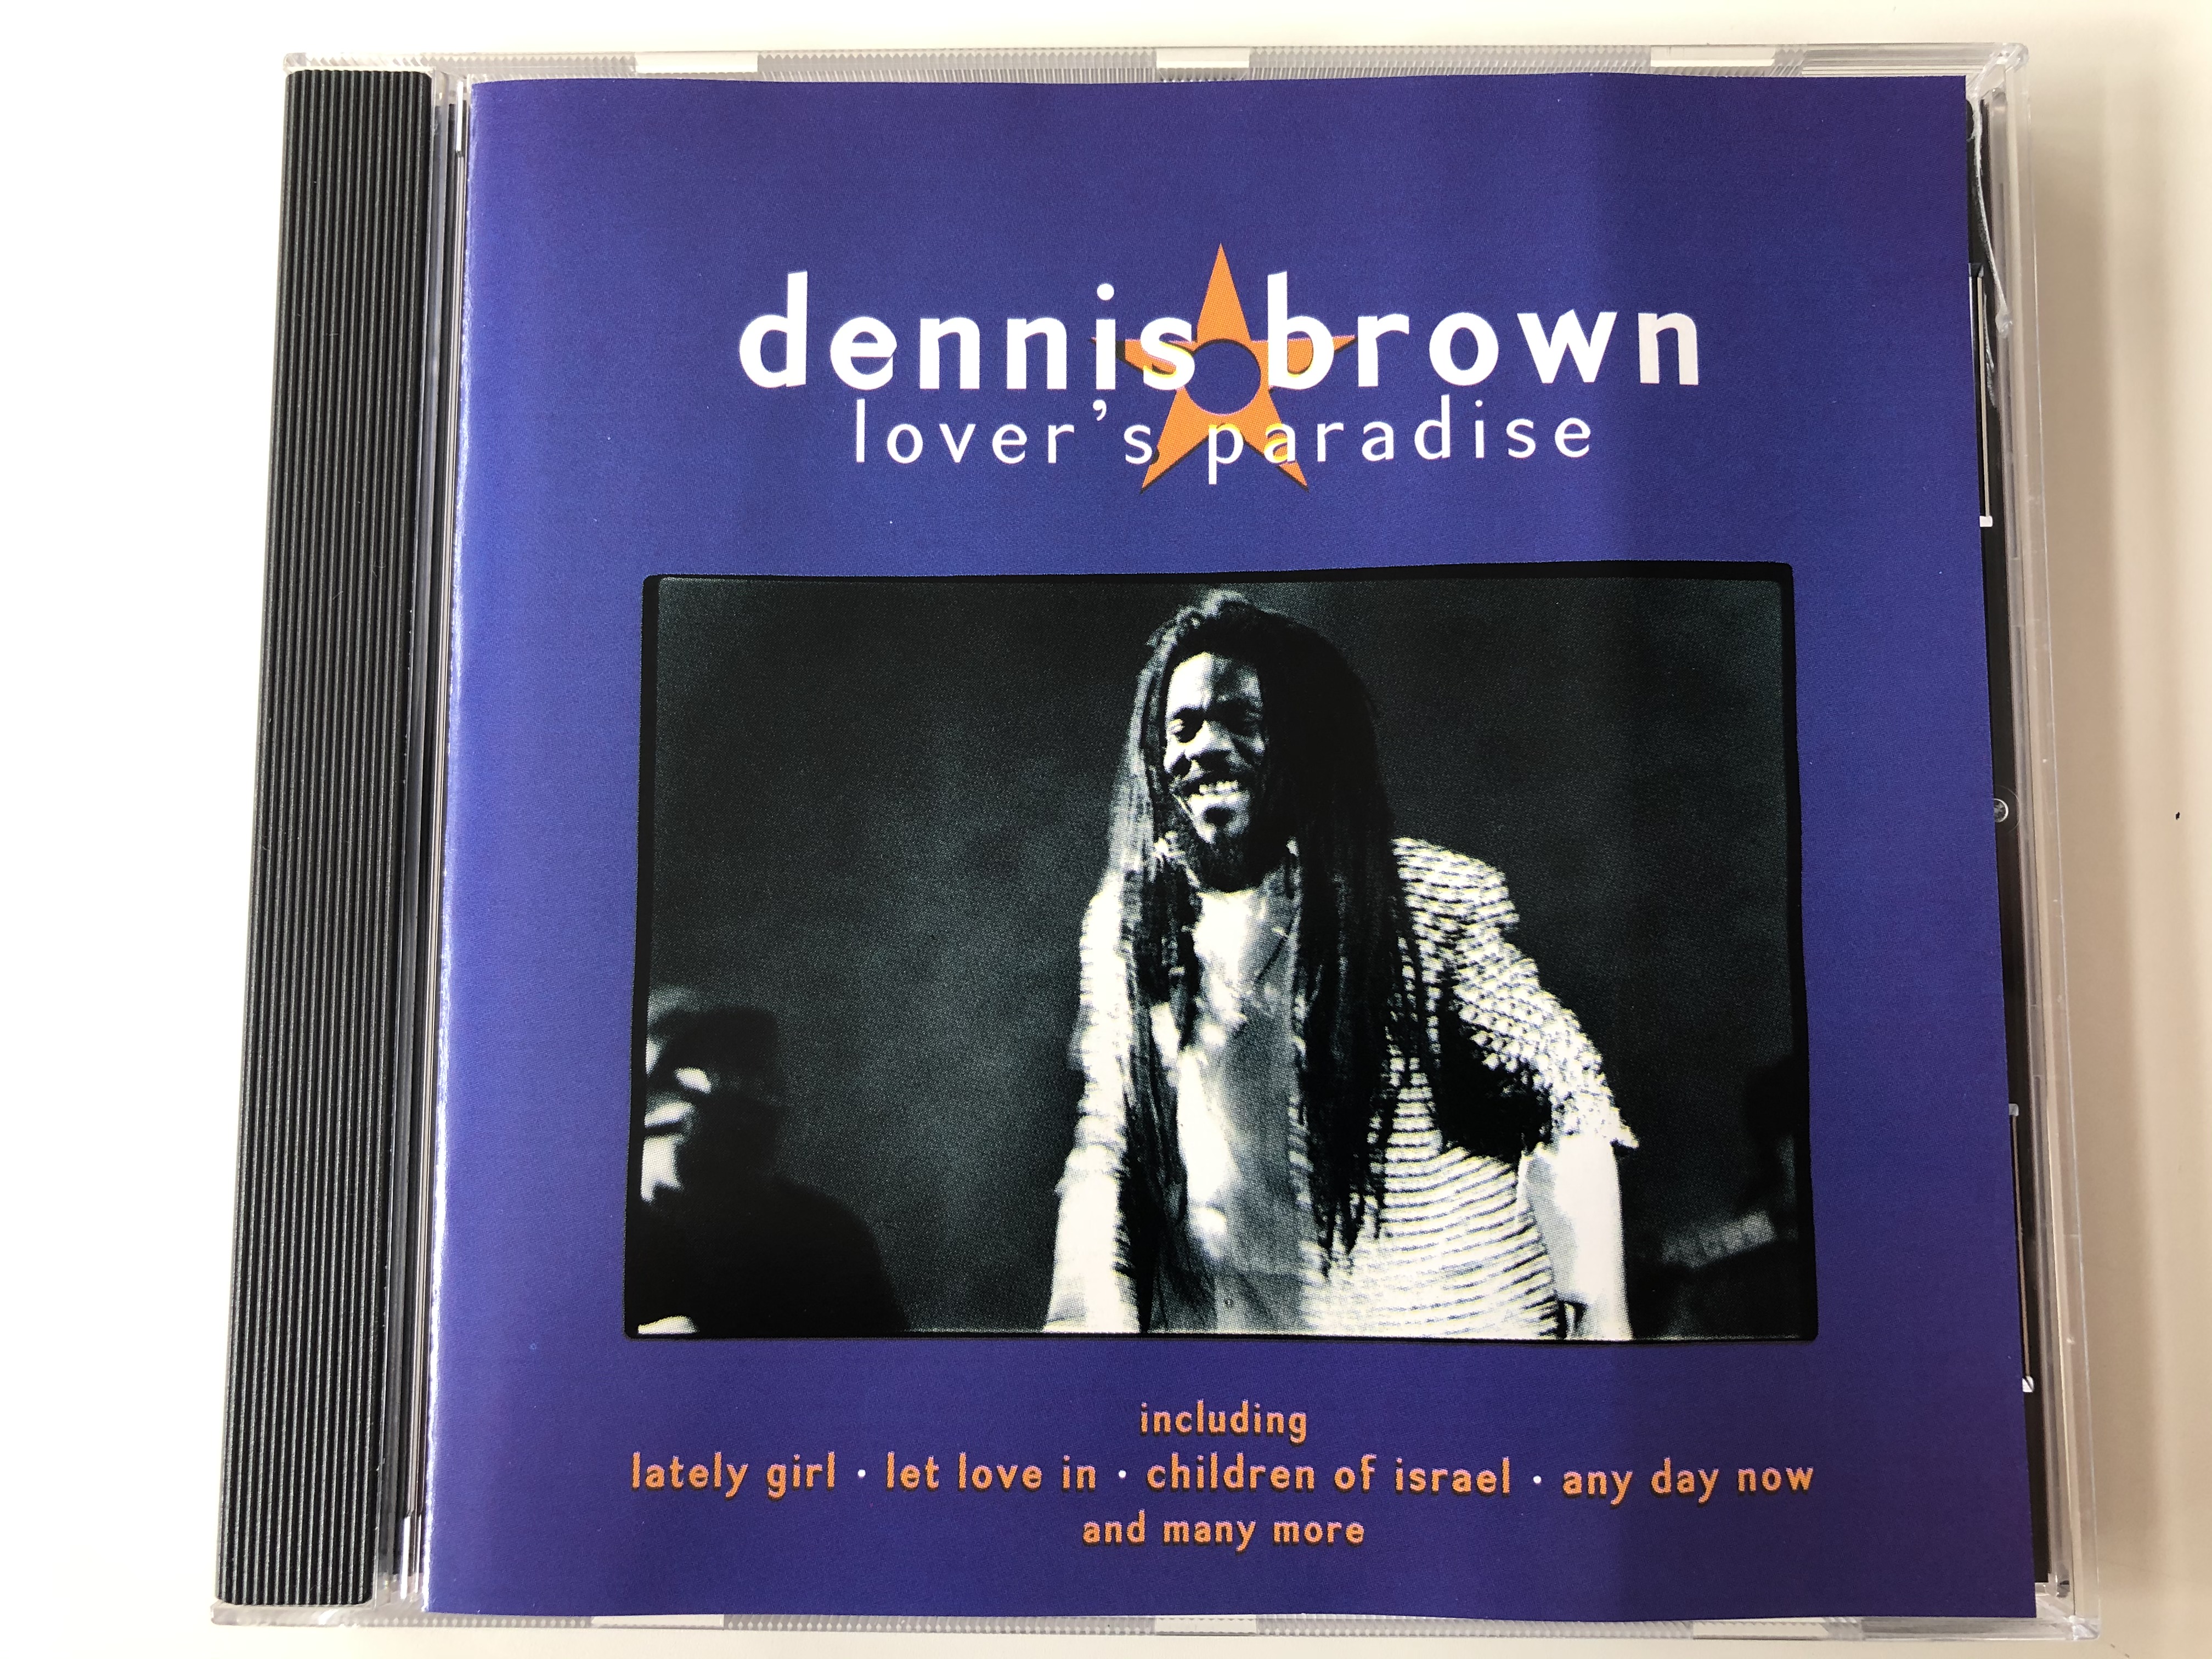 dennis-brown-lover-s-paradise-including-lately-girl-let-love-in-children-of-israel-any-day-now-and-many-more-fmcg-audio-cd-1997-fmc003-1-.jpg